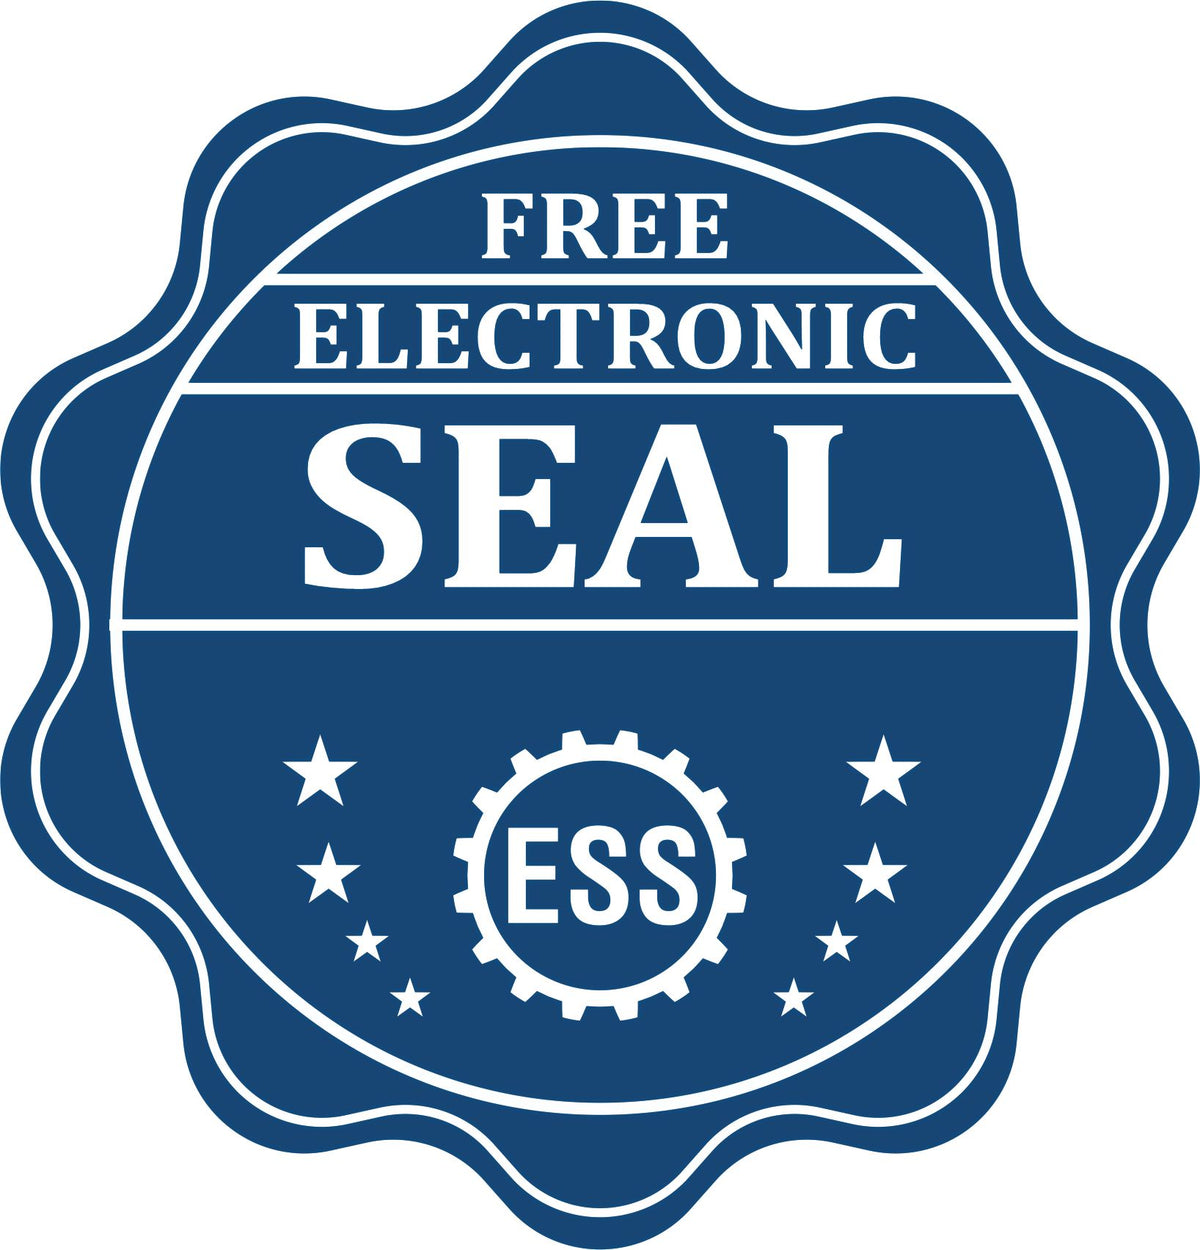 A badge showing a free electronic seal for the Gift Connecticut Geologist Seal with stars and the ESS gear on the emblem.